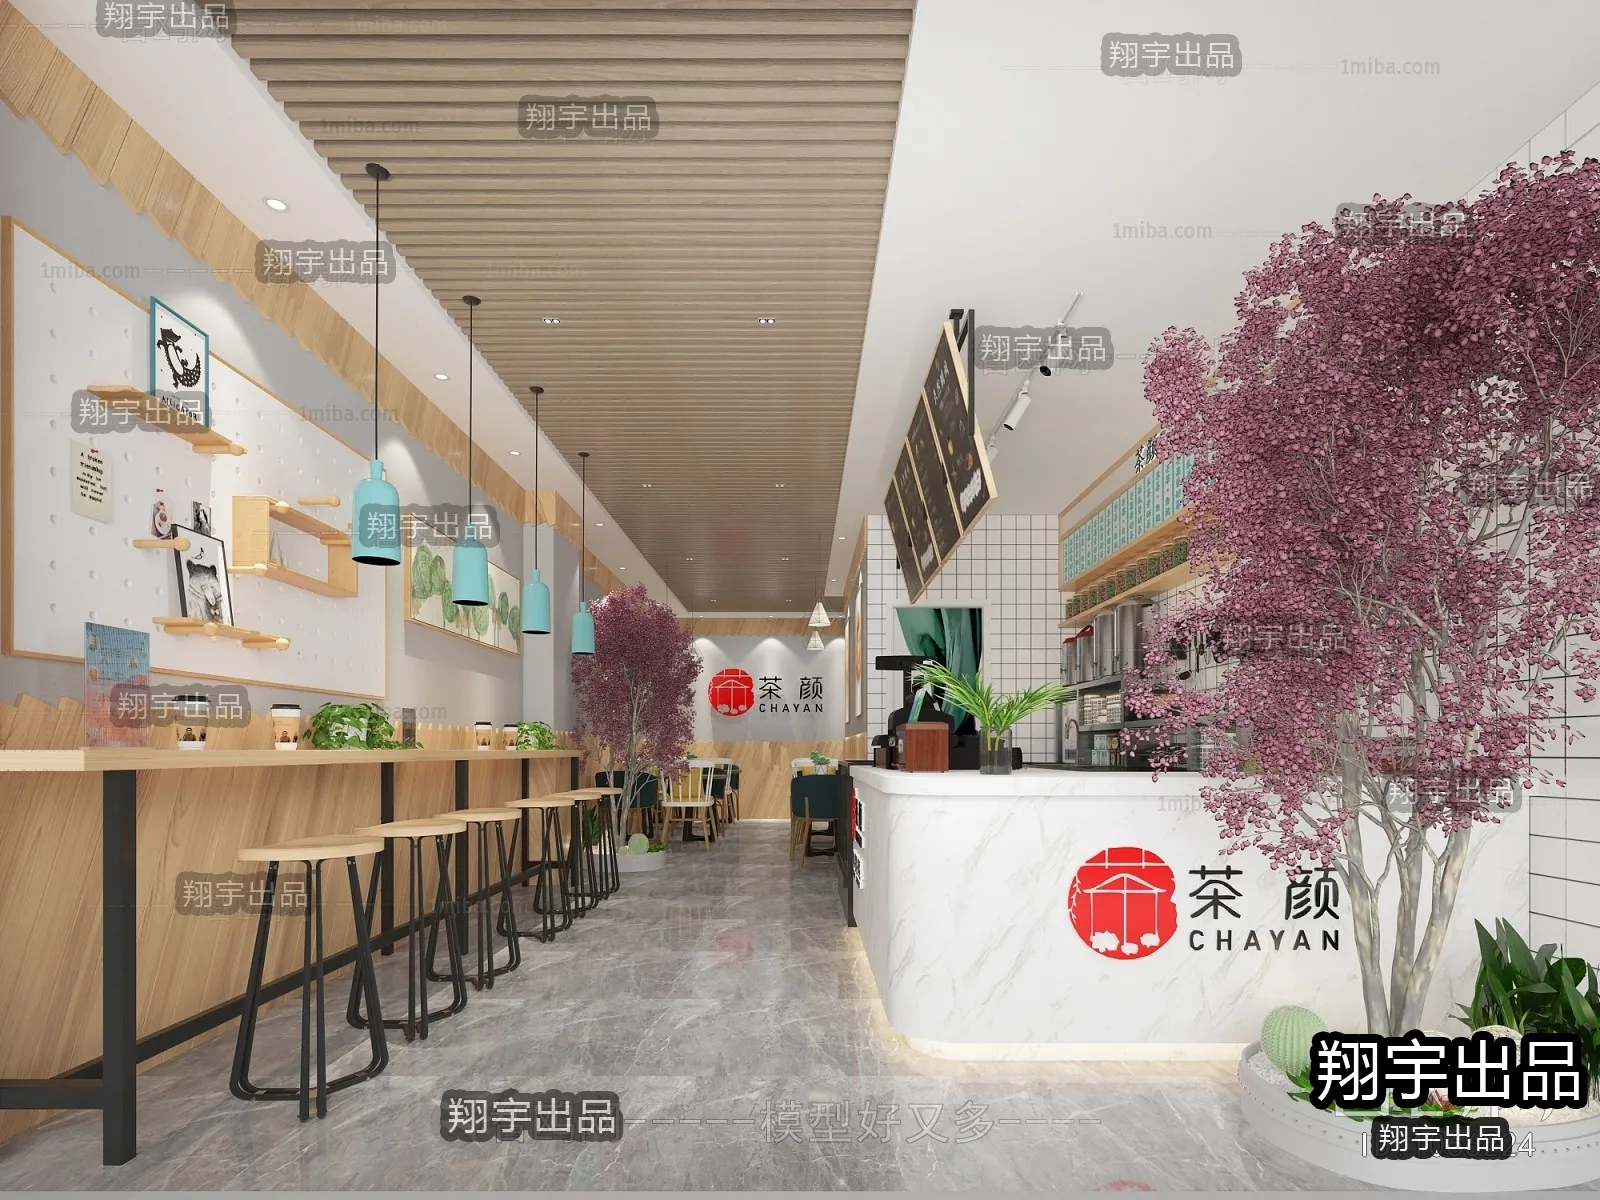 FASTFOOD STORE – 3D SCENES – 0226